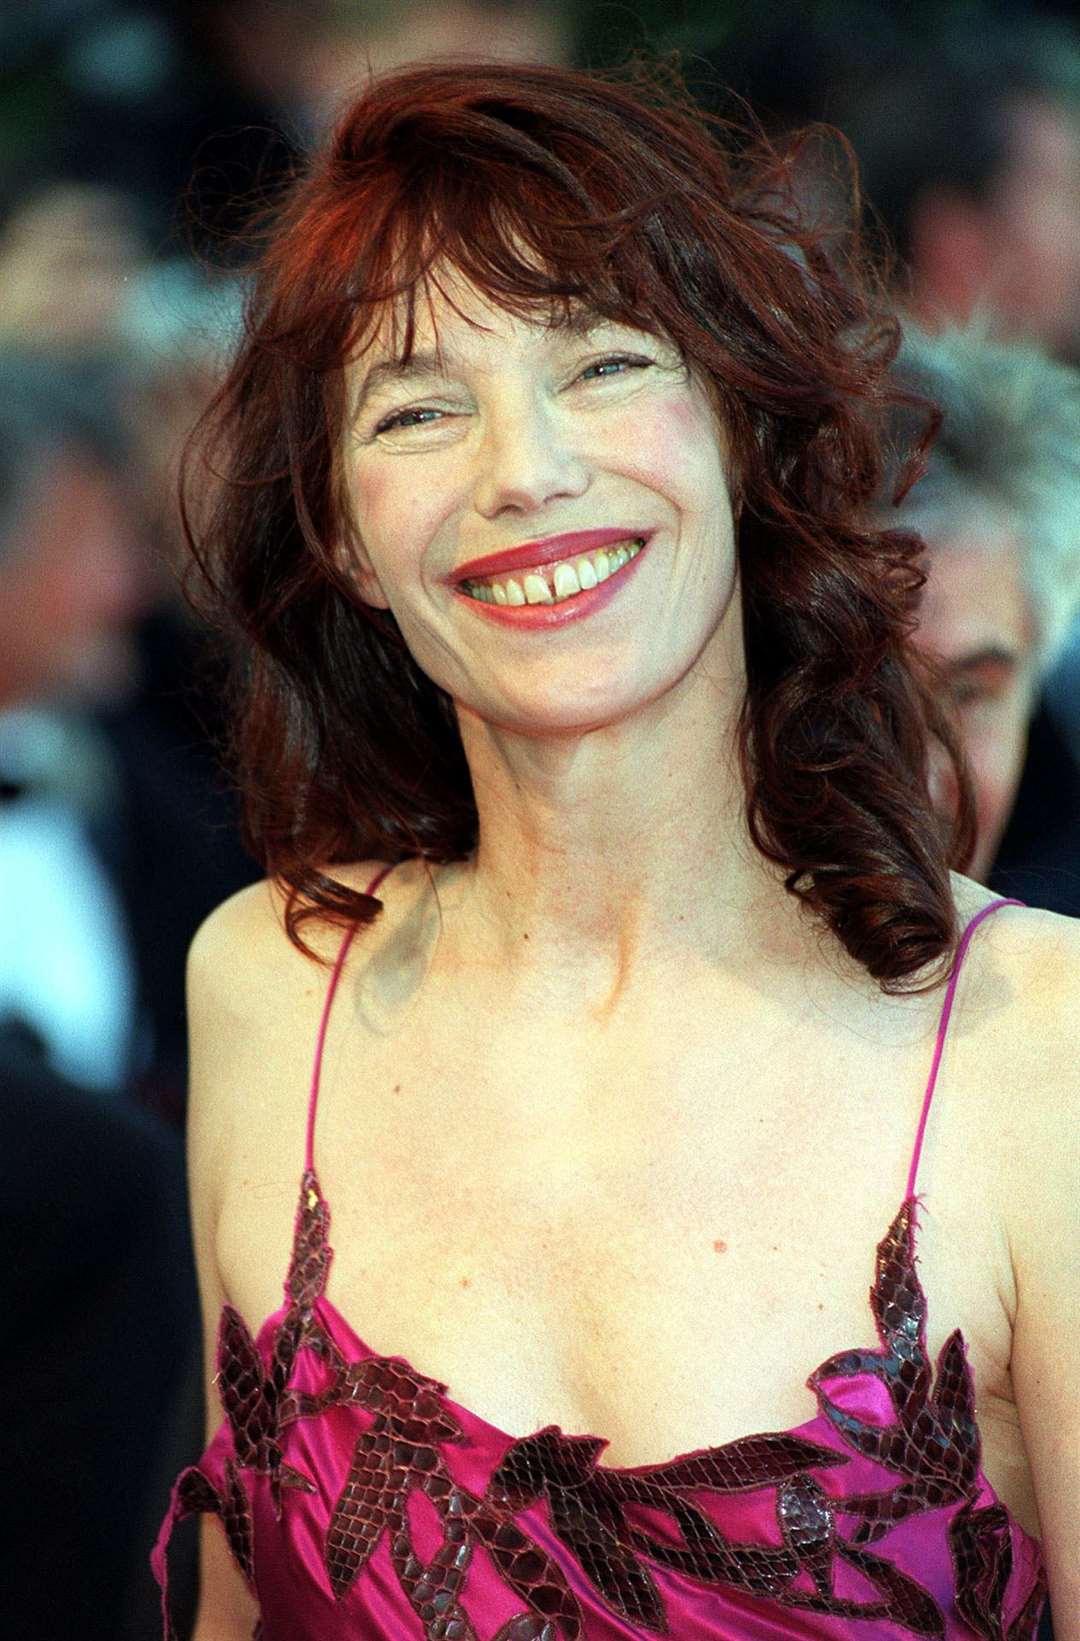 Jane Birkin arrives for the premiere of the film Dancer In The Dark at the 2000 Cannes Film Festival (Toby Melville/PA)